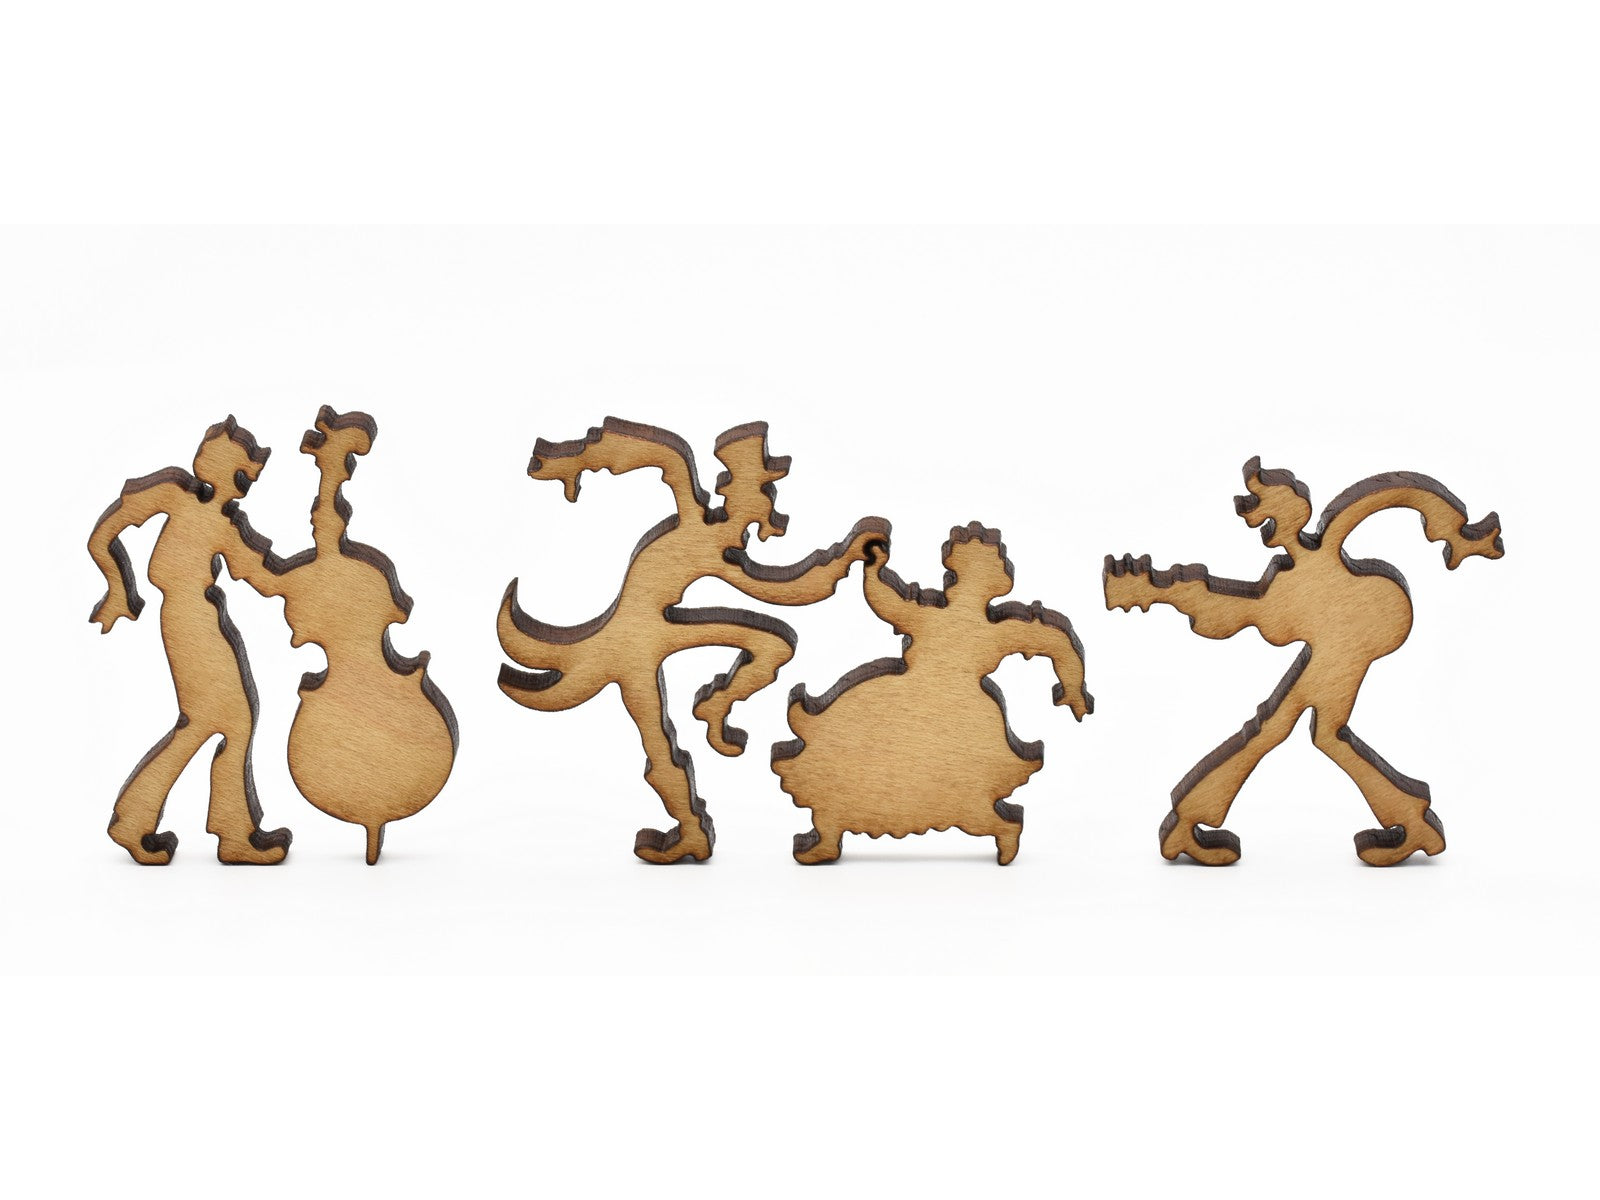 A closeup of pieces in the shape of people playing music and dancing.